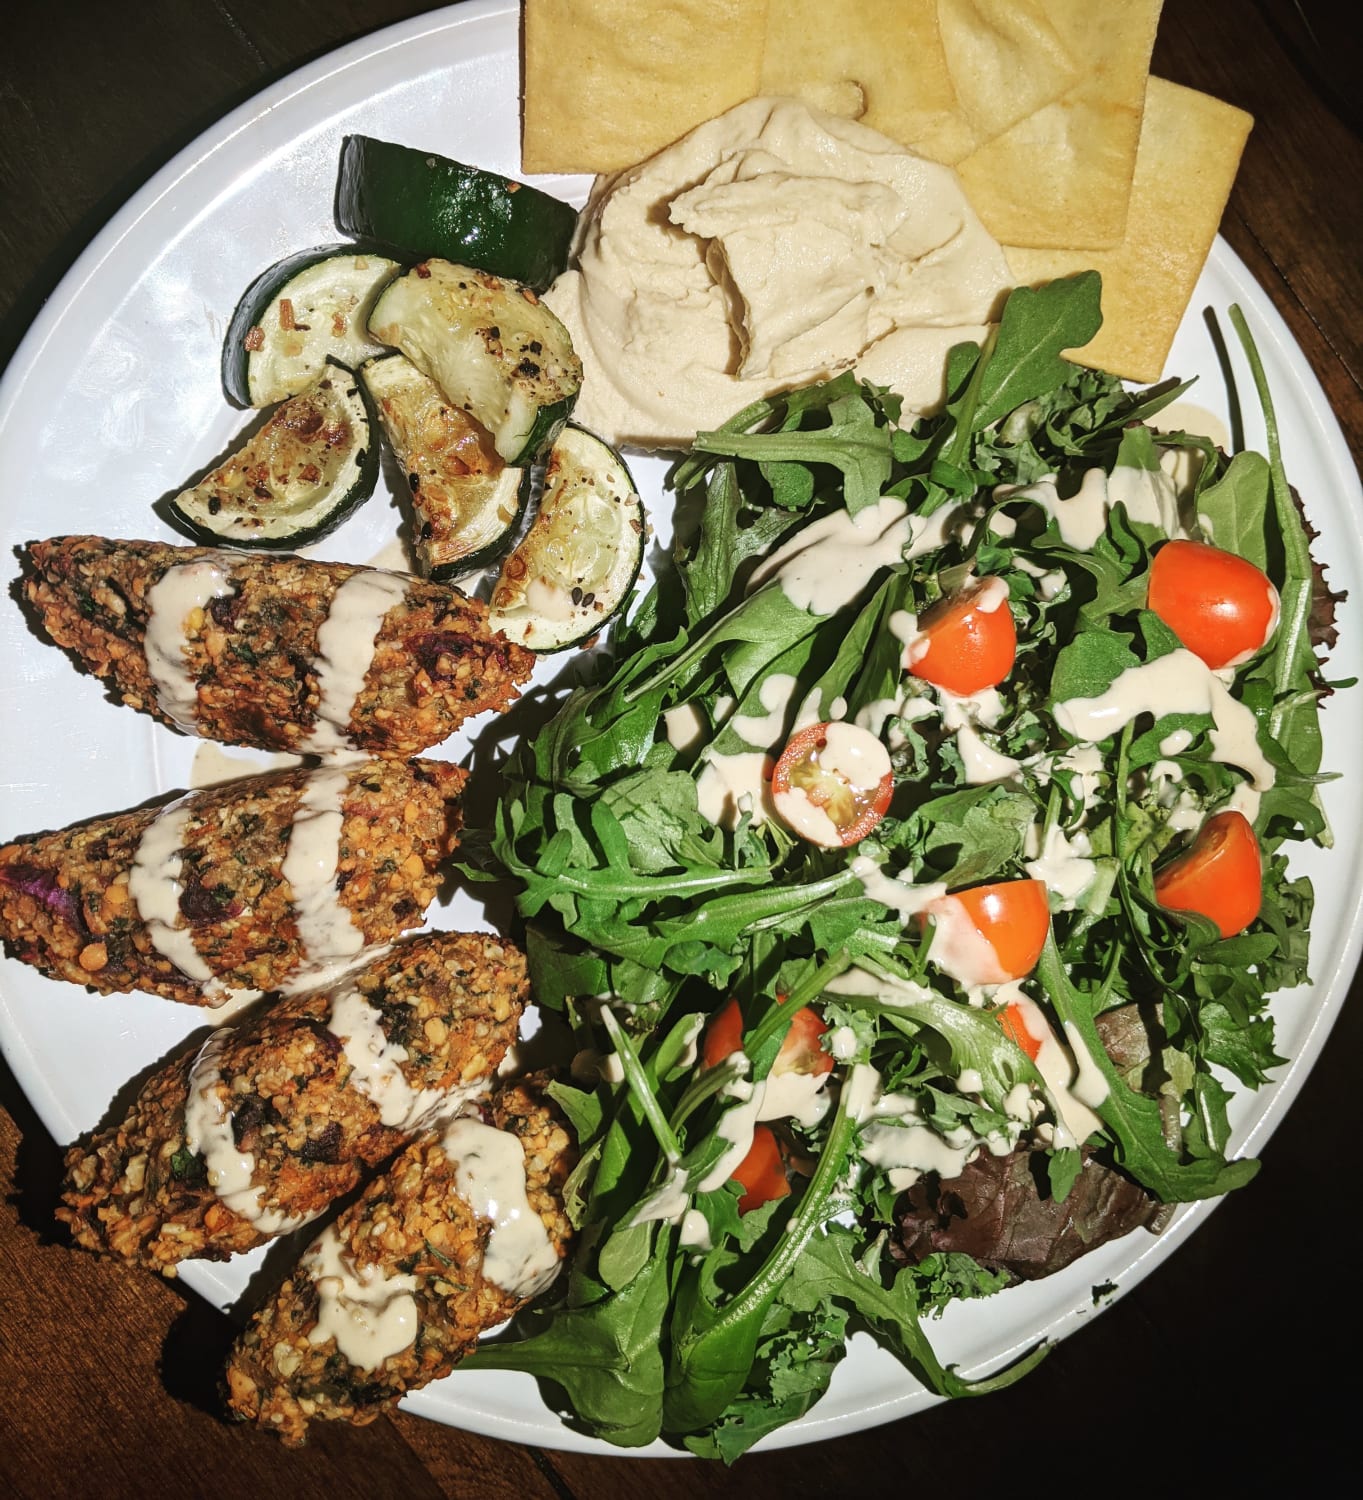 I slipped and had 3 pita chips, still wanted to share these amazing red lentil kabobs, roasted zucchini, home made hummus and salad with tahini/water dressing. Recipe linked in the comments